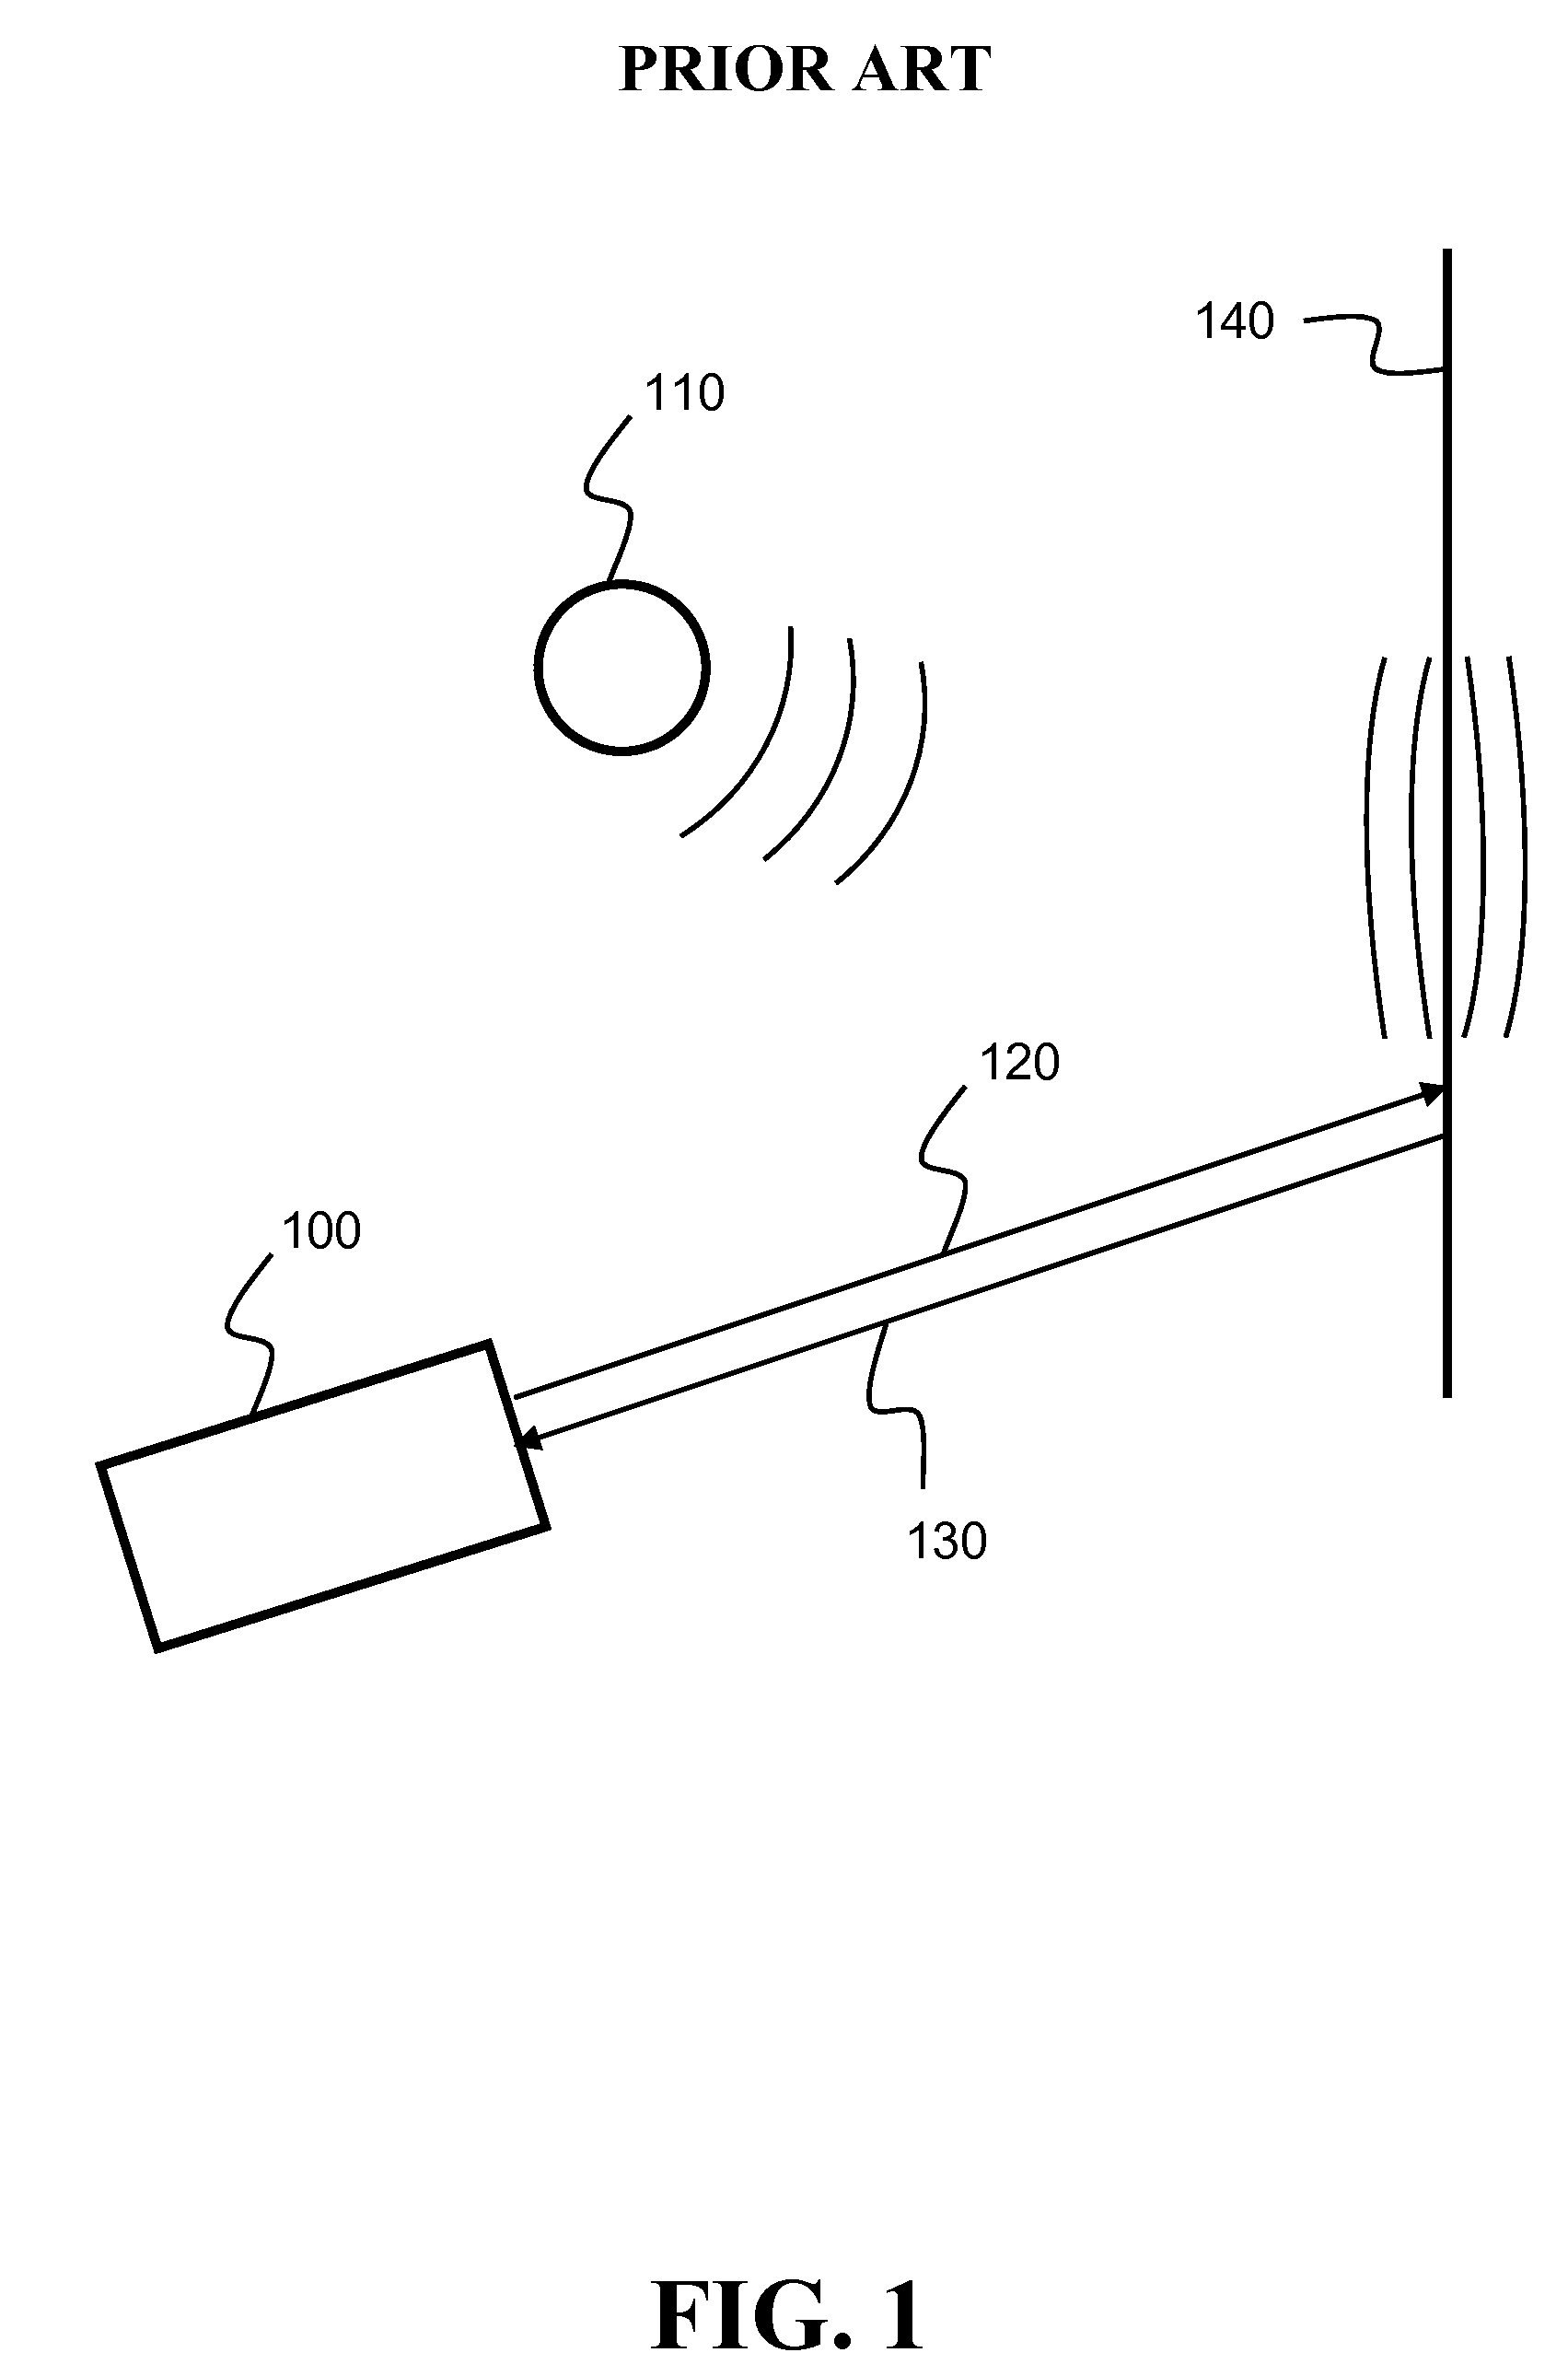 Sound sources separation and monitoring using directional coherent electromagnetic waves